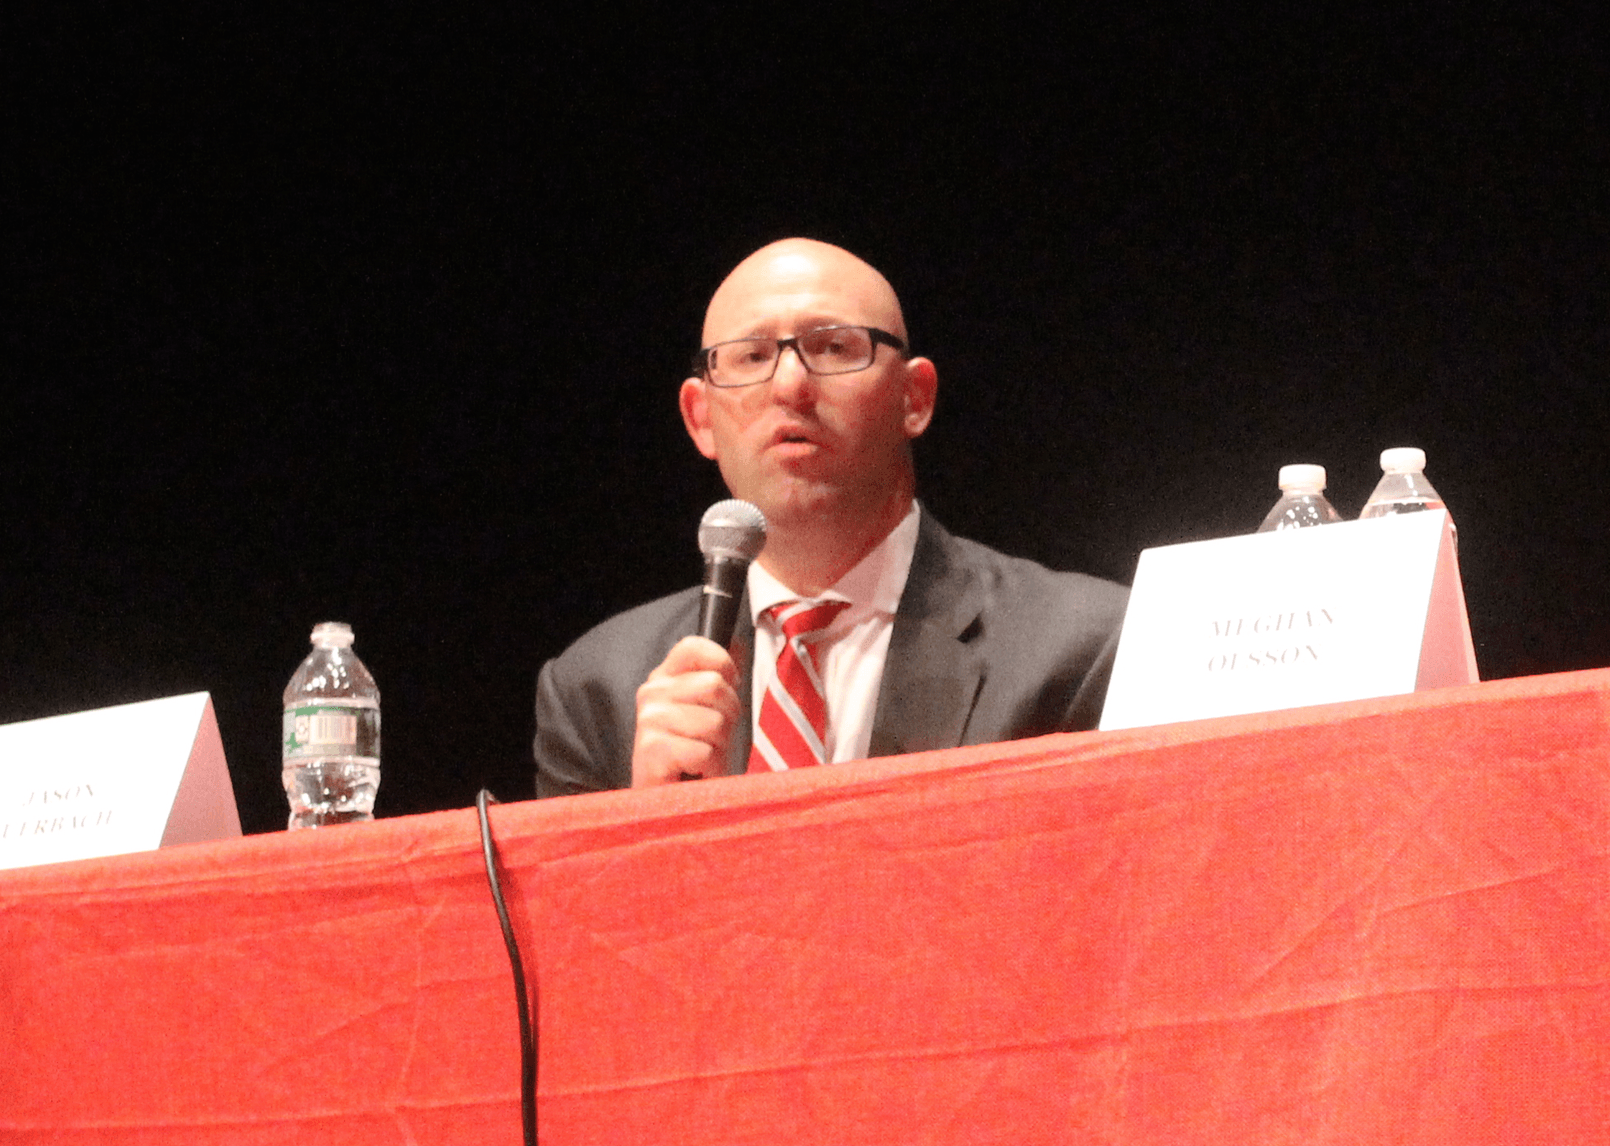 Board of Education candidate Jason Auerbach at the Oct 10 forum at Greenwich High School. Photo: Leslie Yager